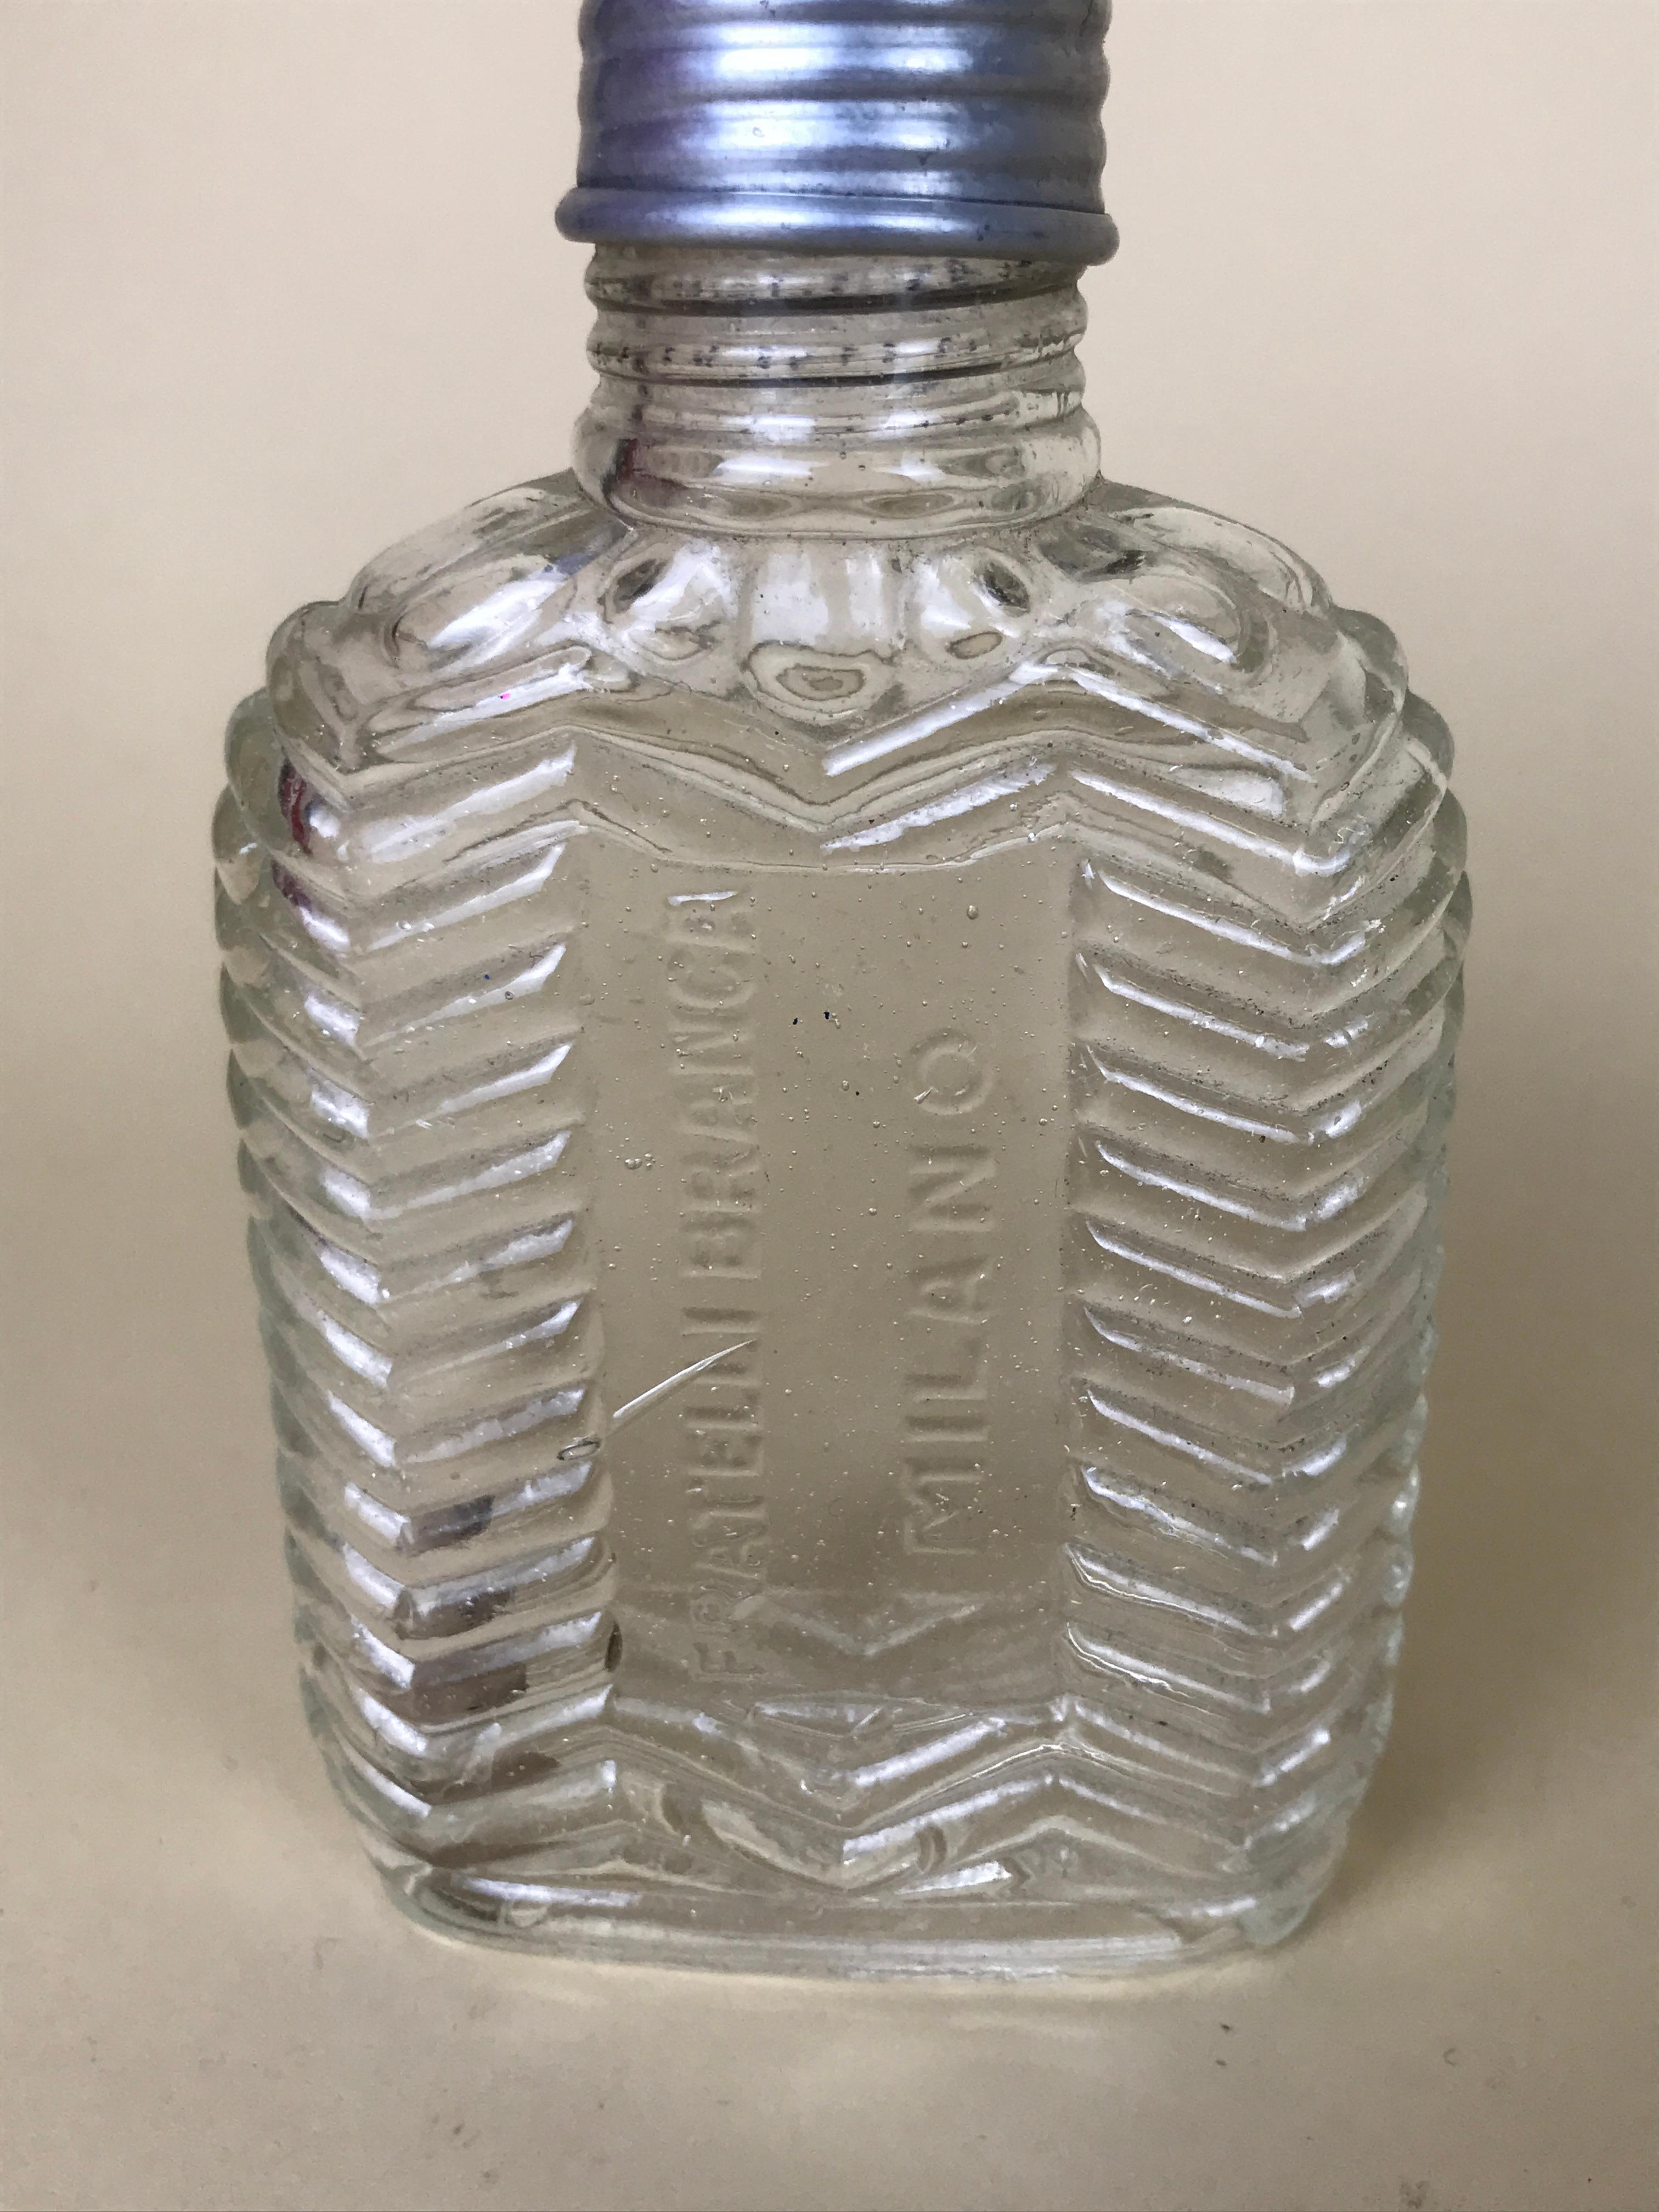 1950s Rare Vintage Italian Fratelli Branca Milano Glass Flask with Aluminium Cup For Sale 3